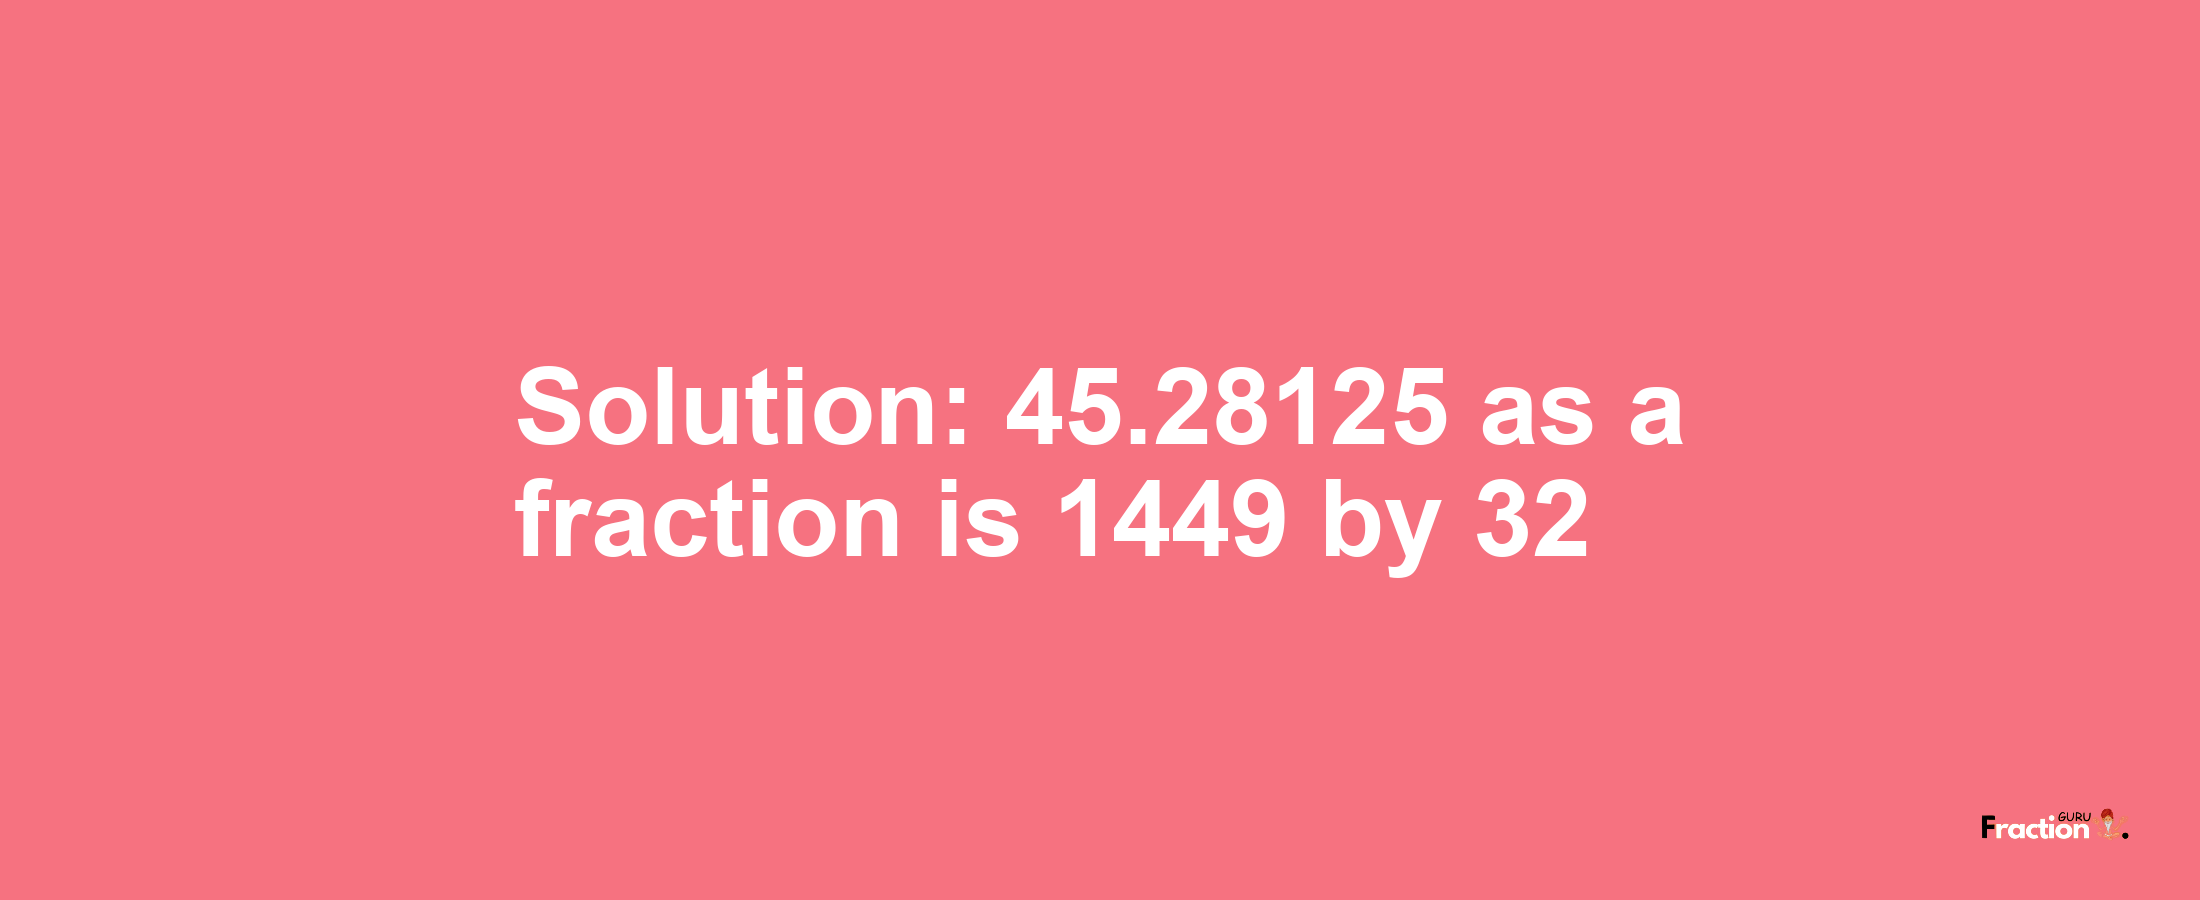 Solution:45.28125 as a fraction is 1449/32